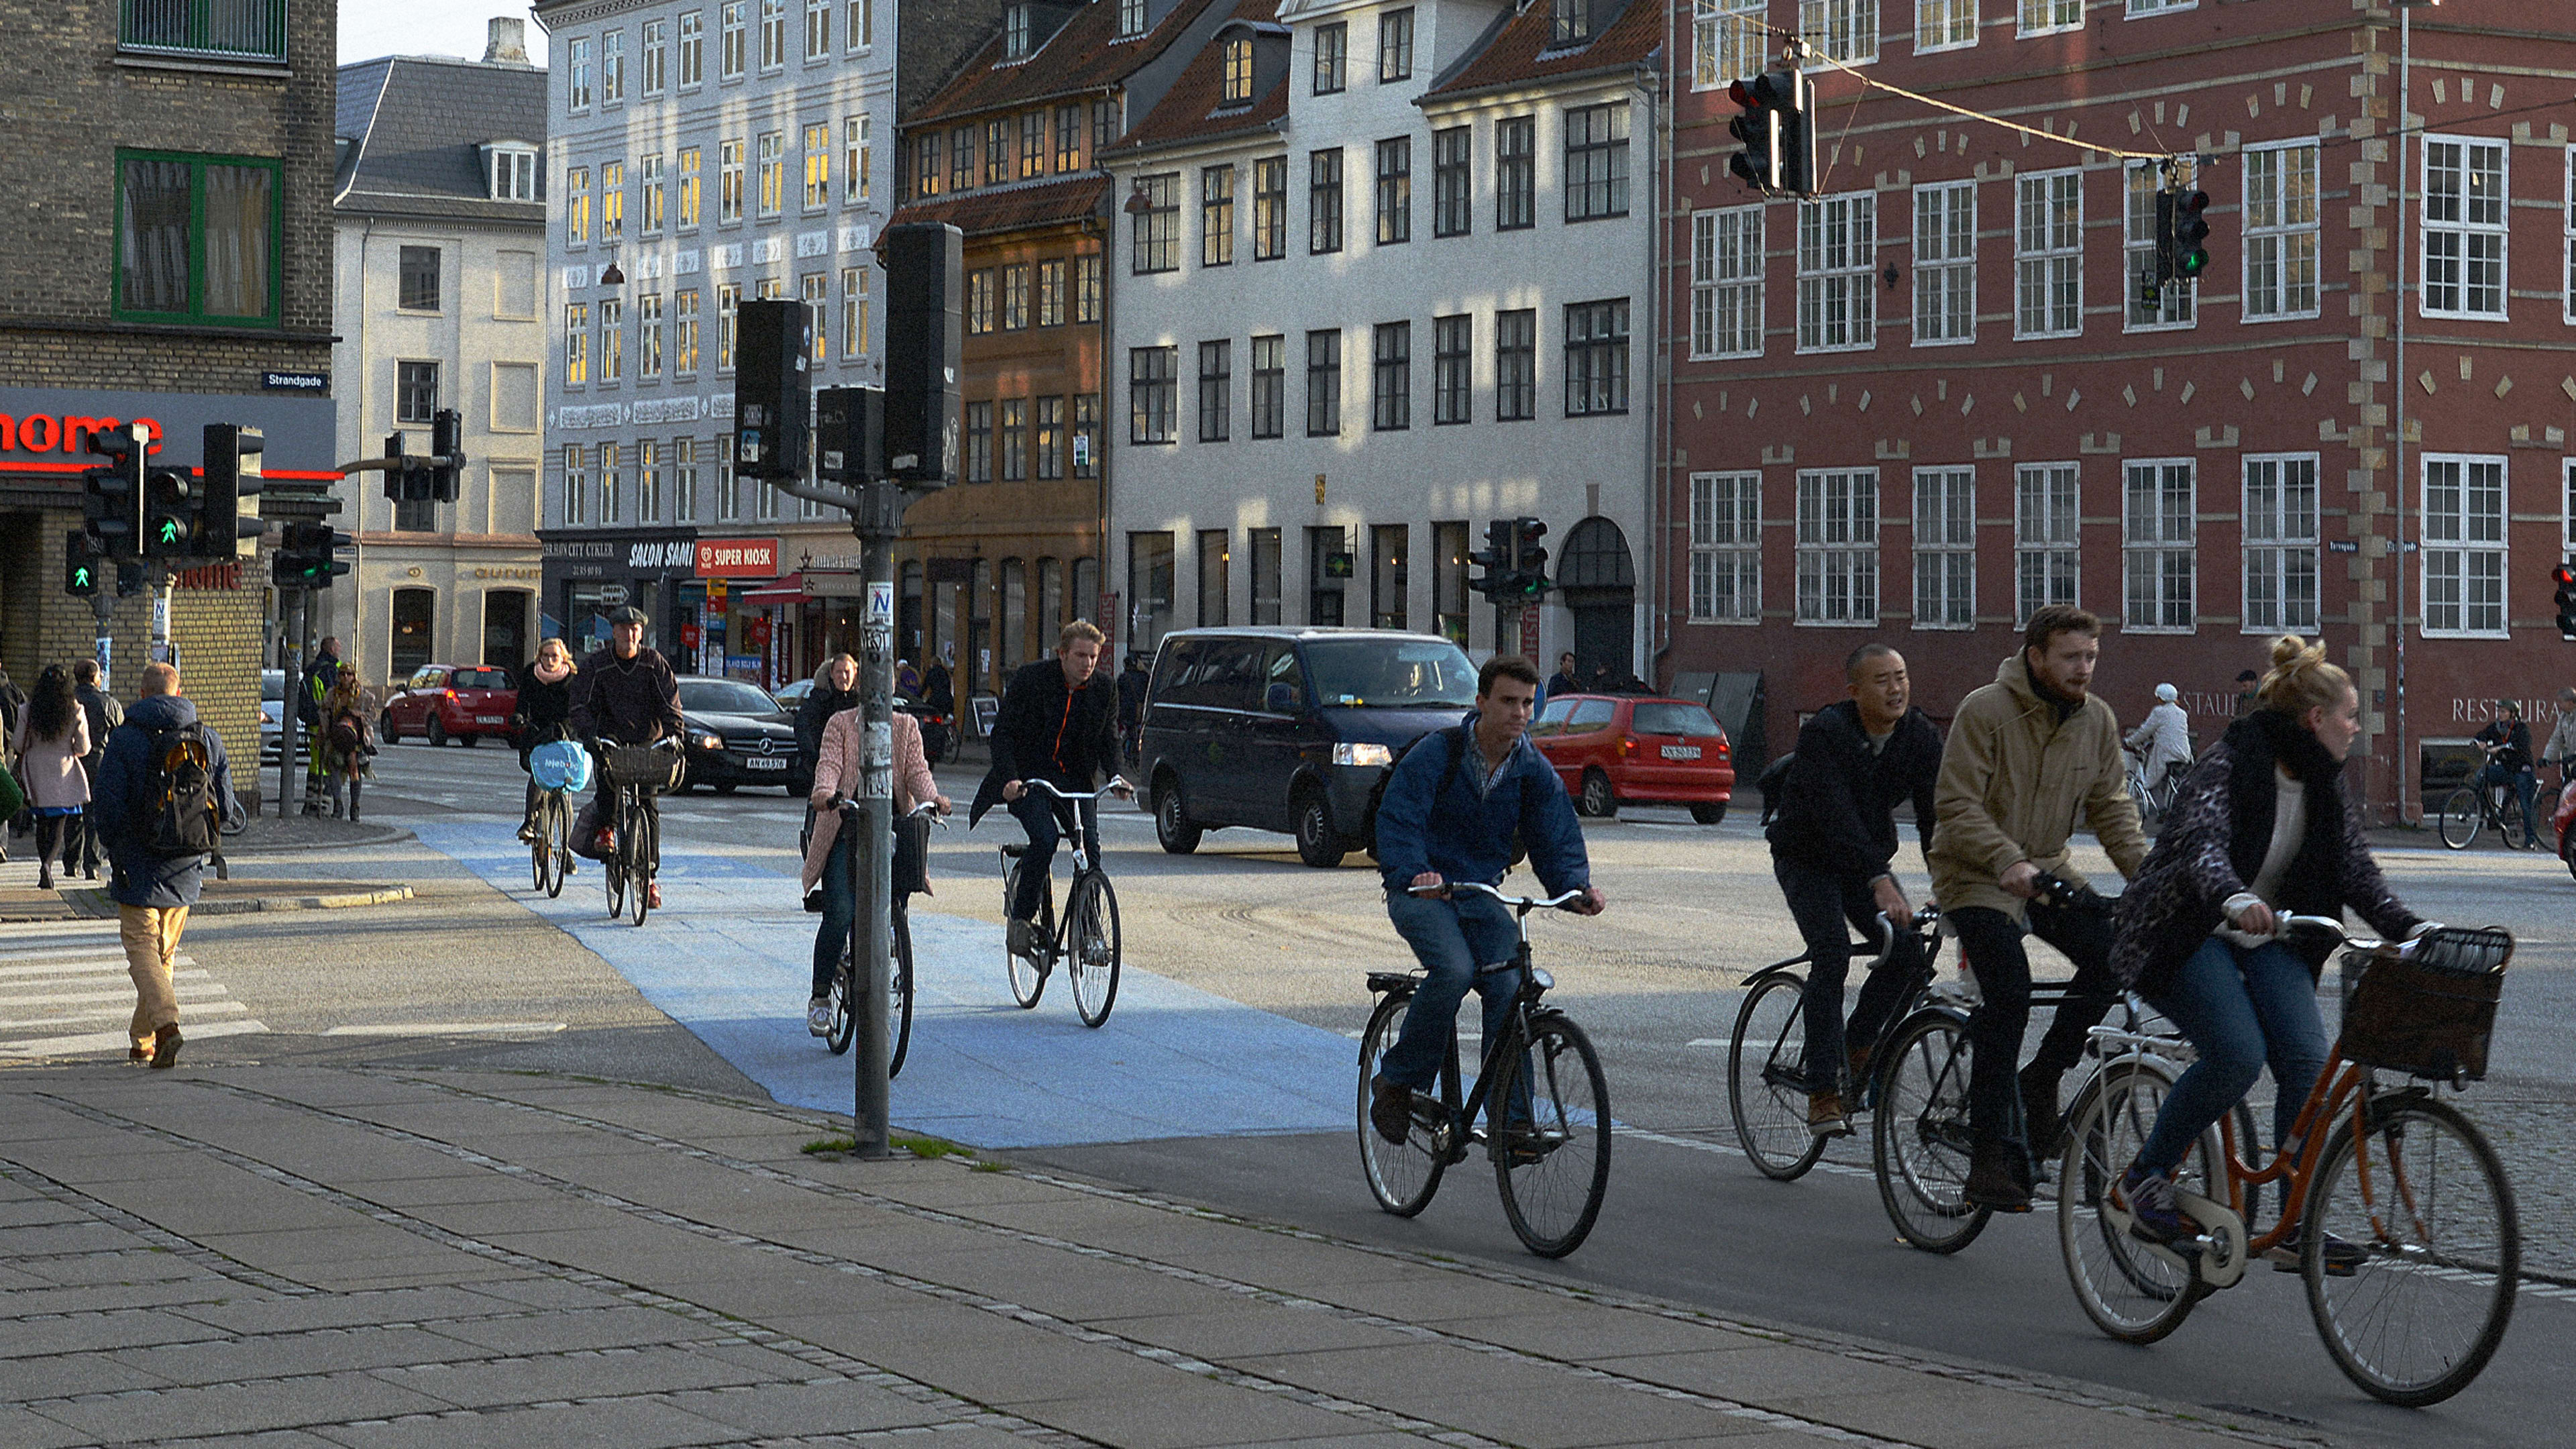 These are the 20 best cities for biking in the world